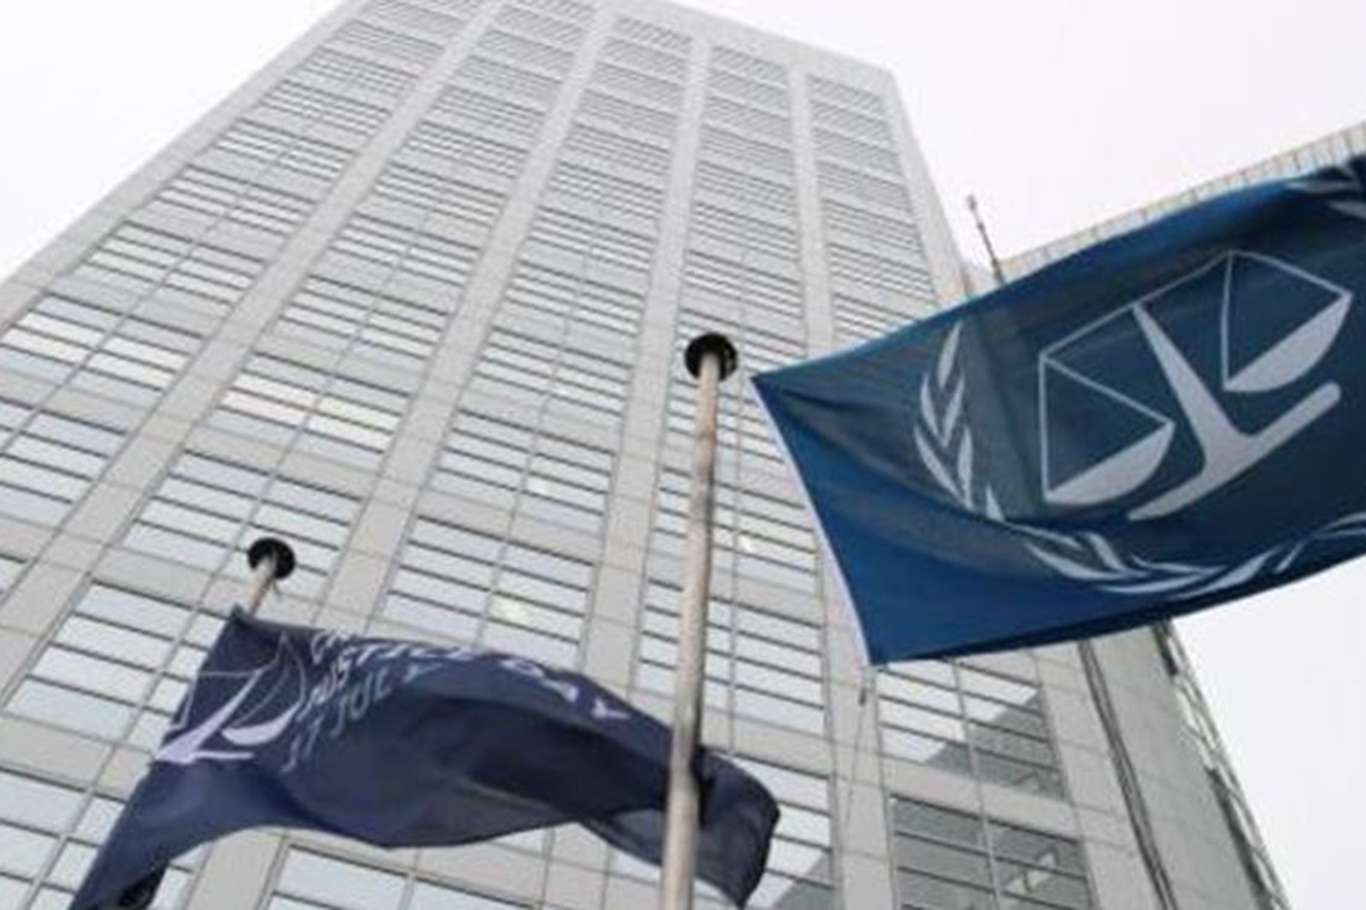 ICC to look into war crimes claim against zionist army officials